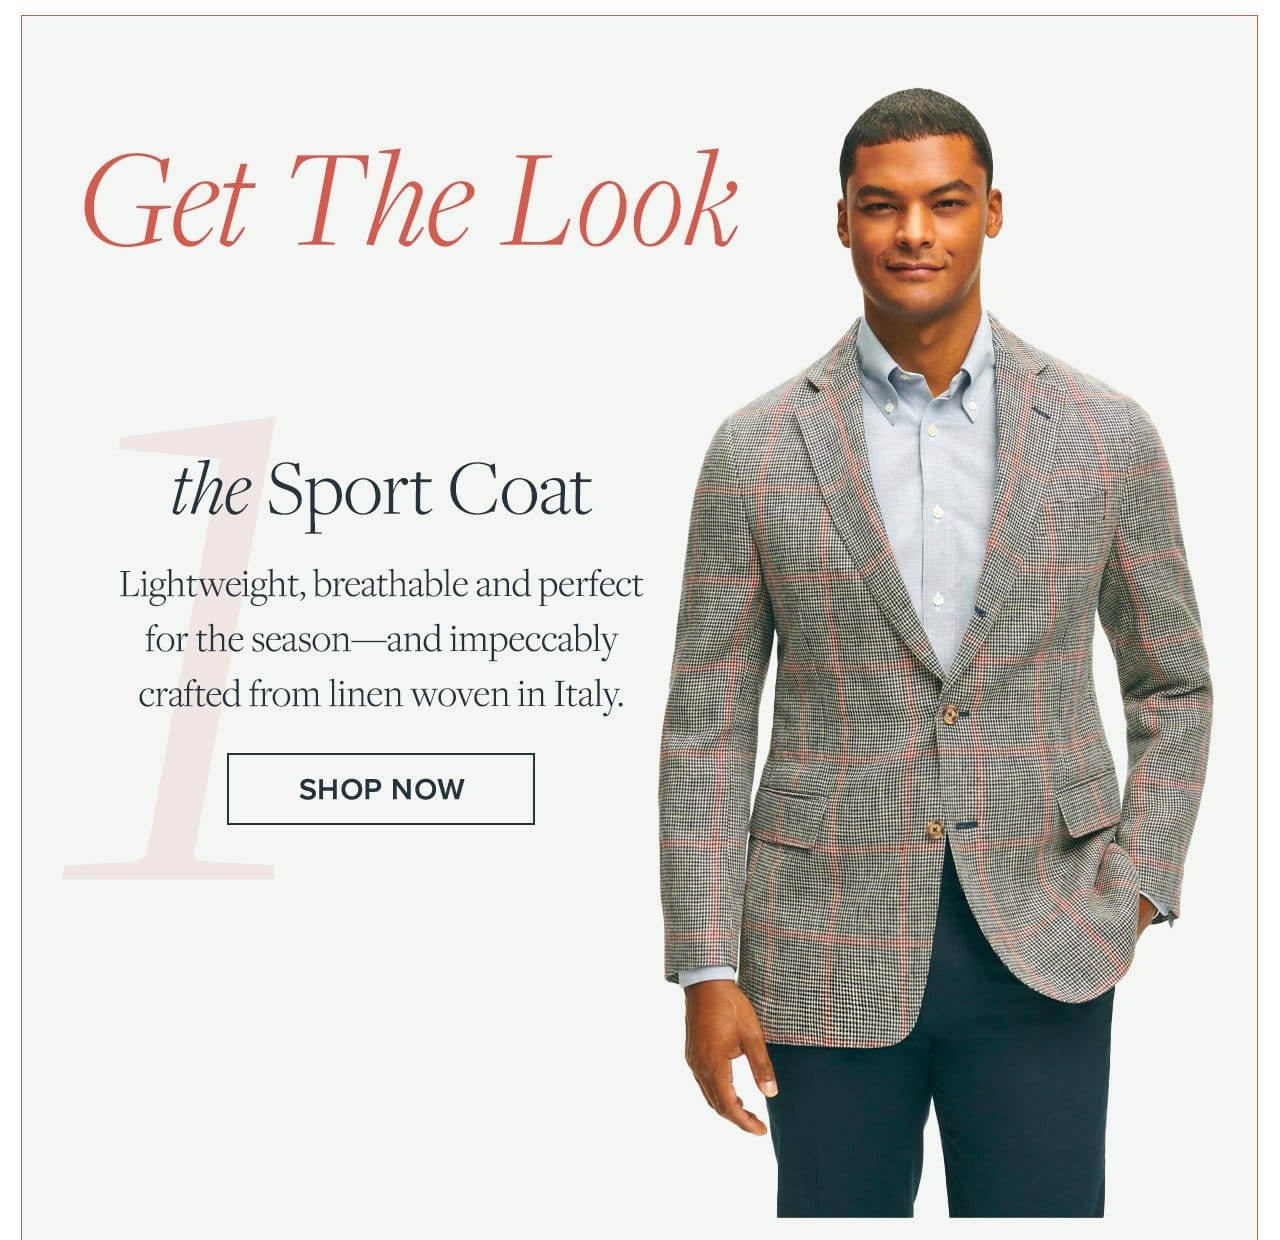 Get The Look 1) the Sport Coat Lightweight, breathable and perfect for the season - and impeccably crafted from linen woven in Italy. Shop Now